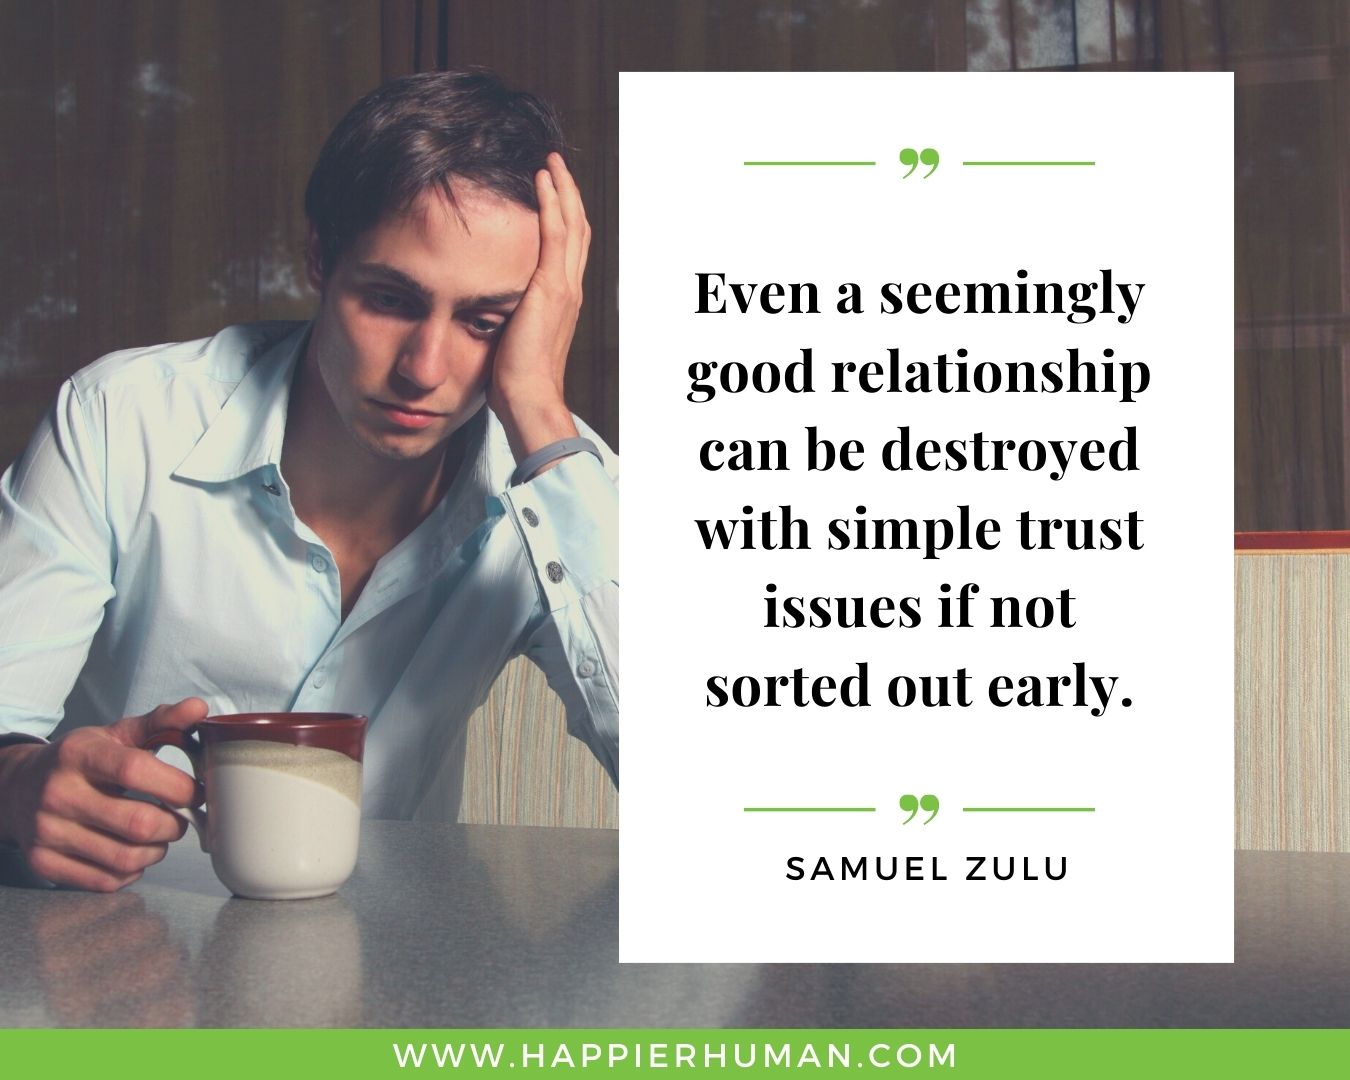 Love and Trust Message in Relationships